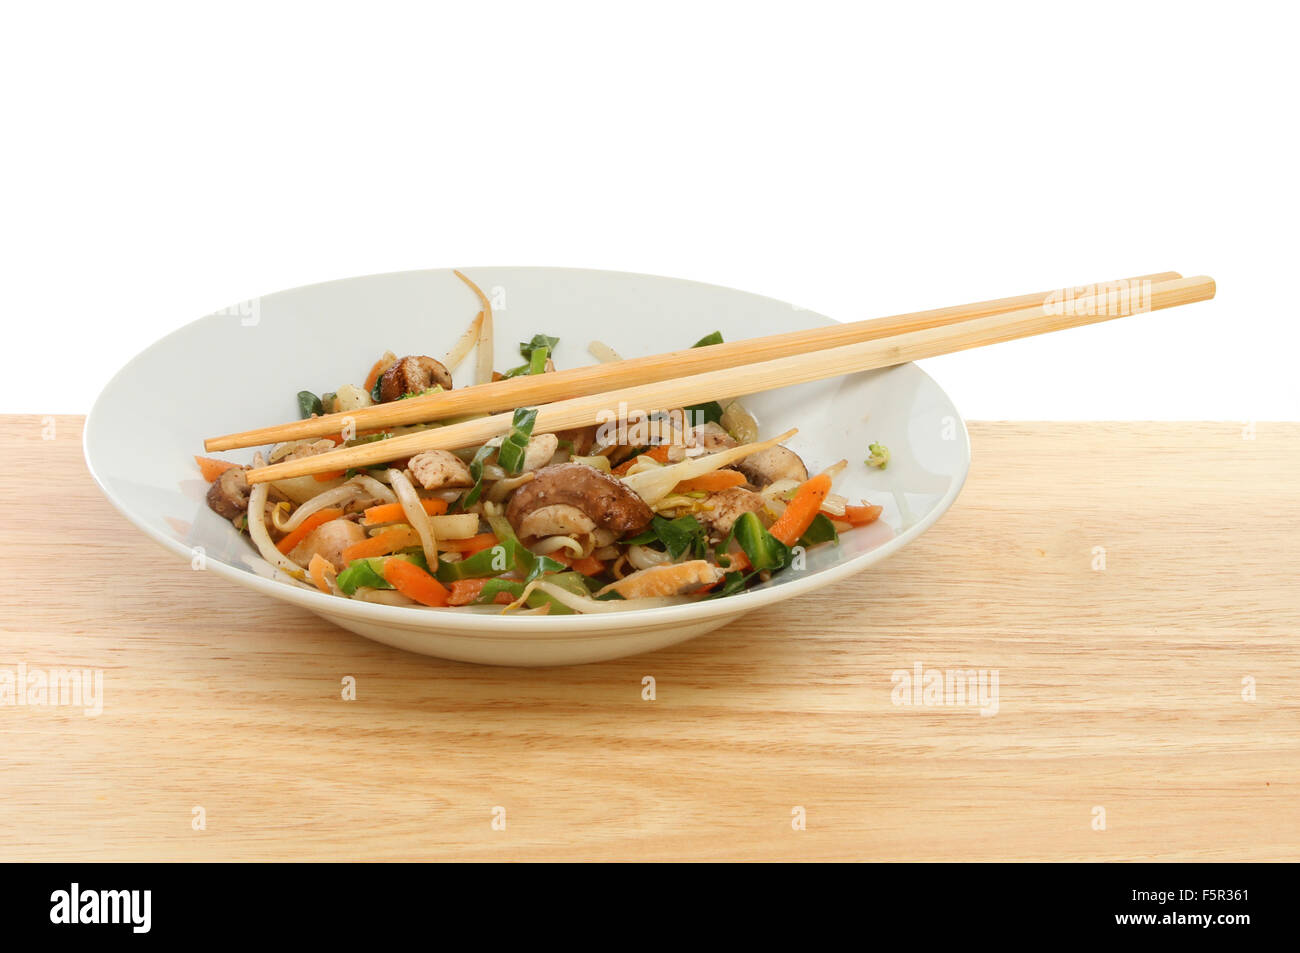 Stir fried chicken abd vegetables with chopsticks in a bowl on a wooden table Stock Photo